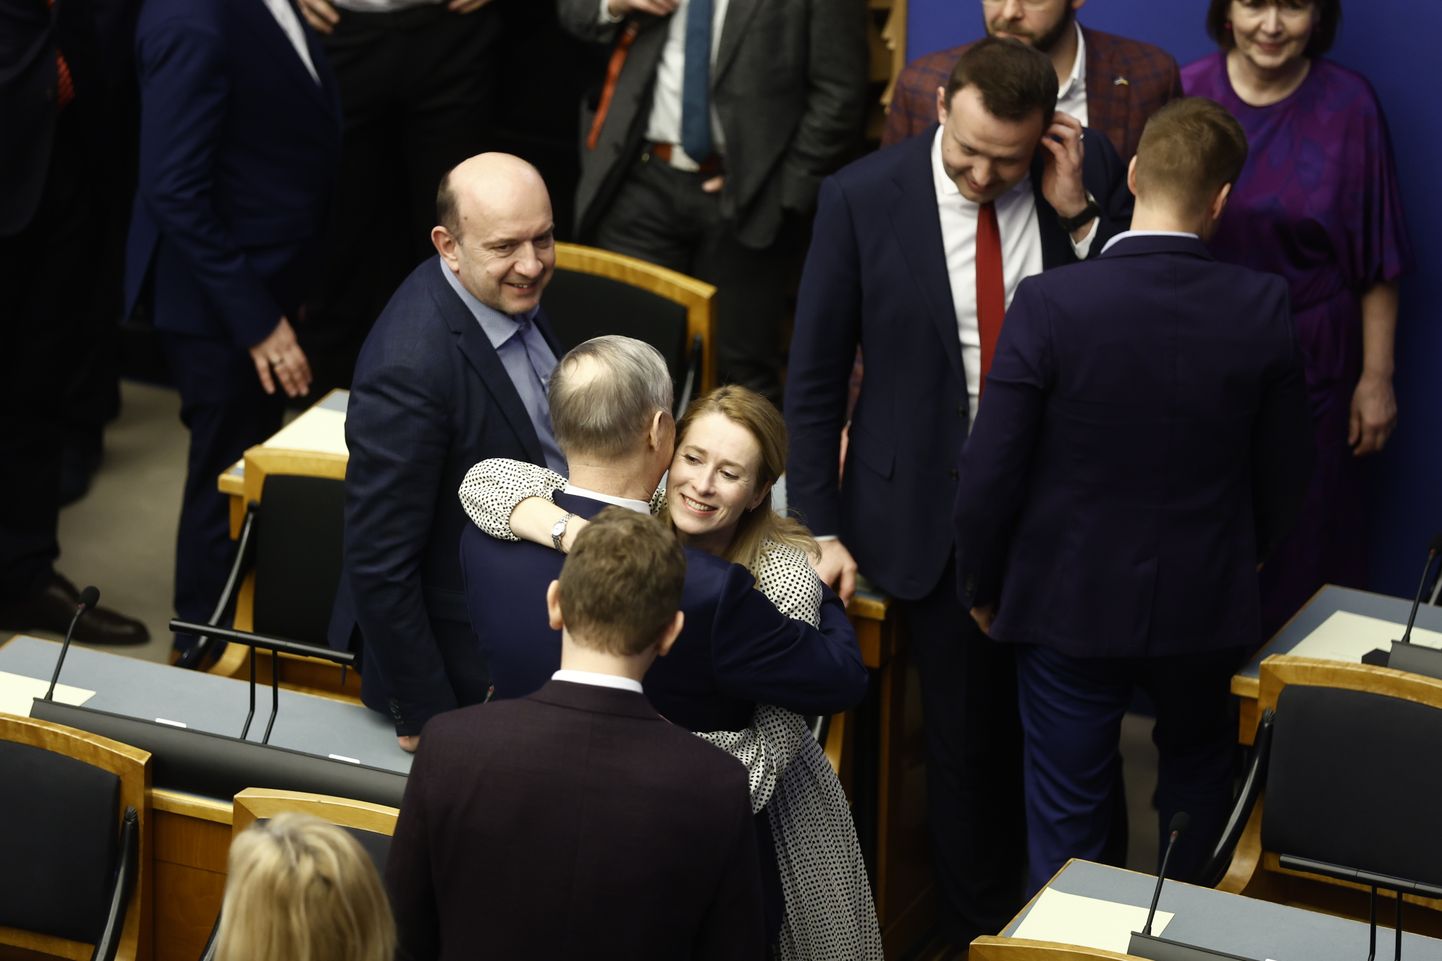 The Estonian parliament on Wednesday decided to give prime minister candidate Kaja Kallas the authority to form a government.